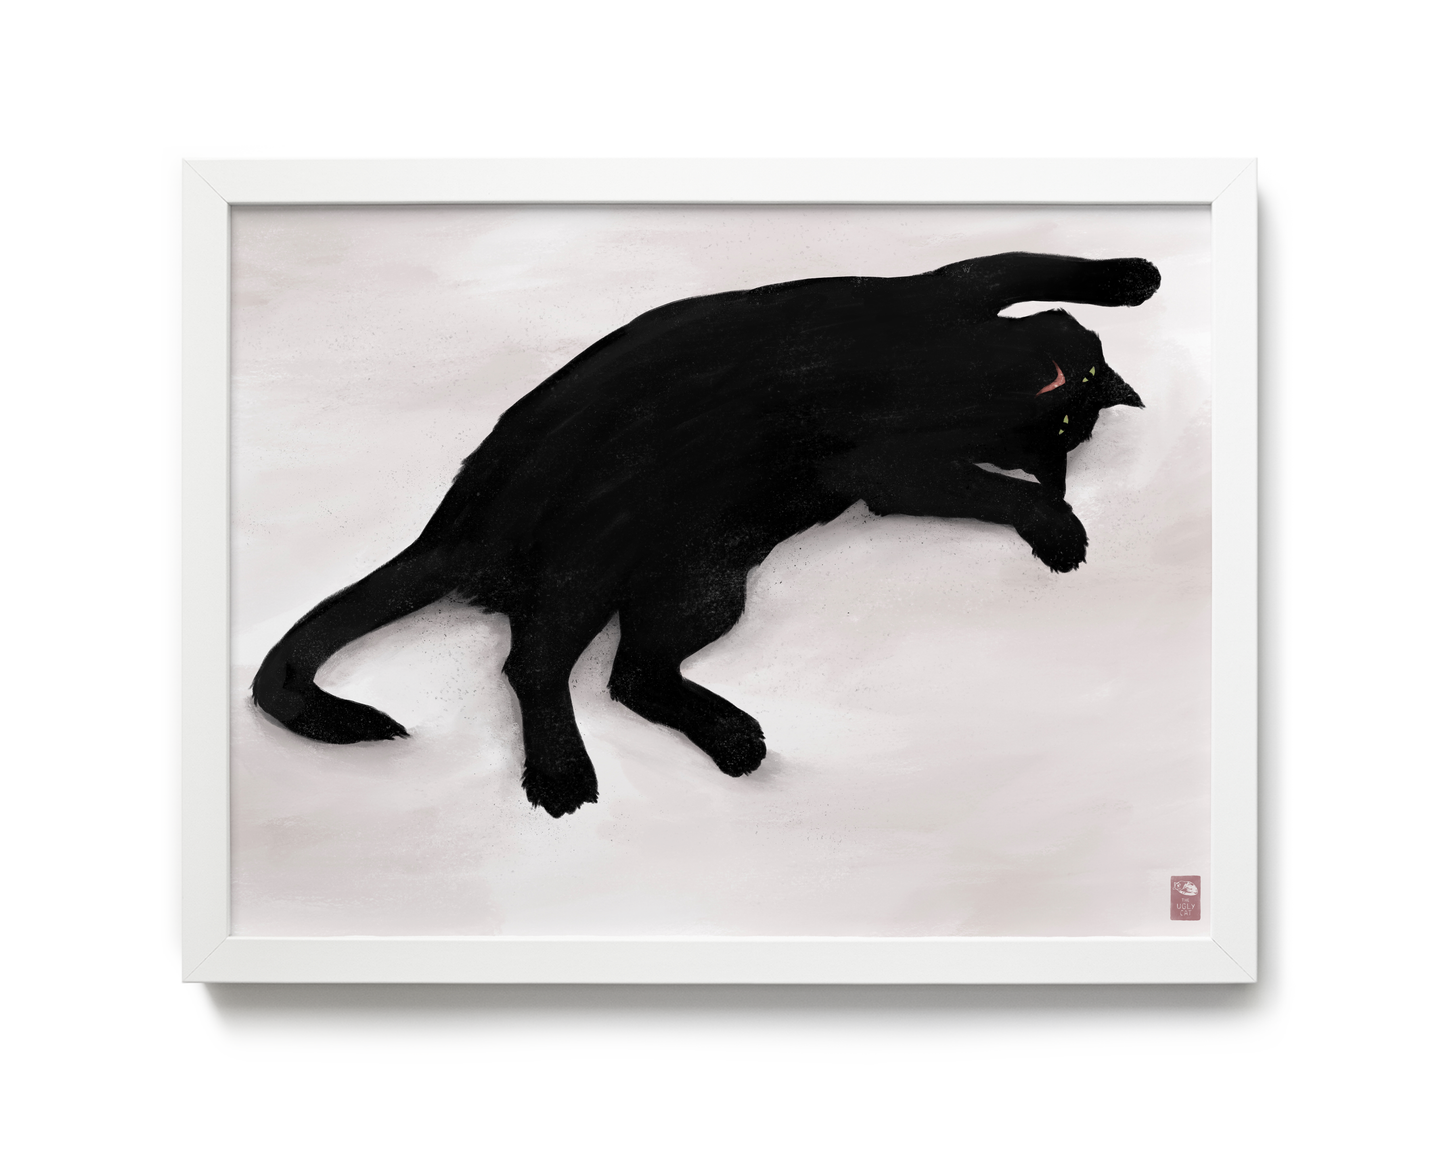 "Sillhouette of Woodhouse" by Catherine Hébert - Cat Silhouette Giclee Art Print - 12"x16" size